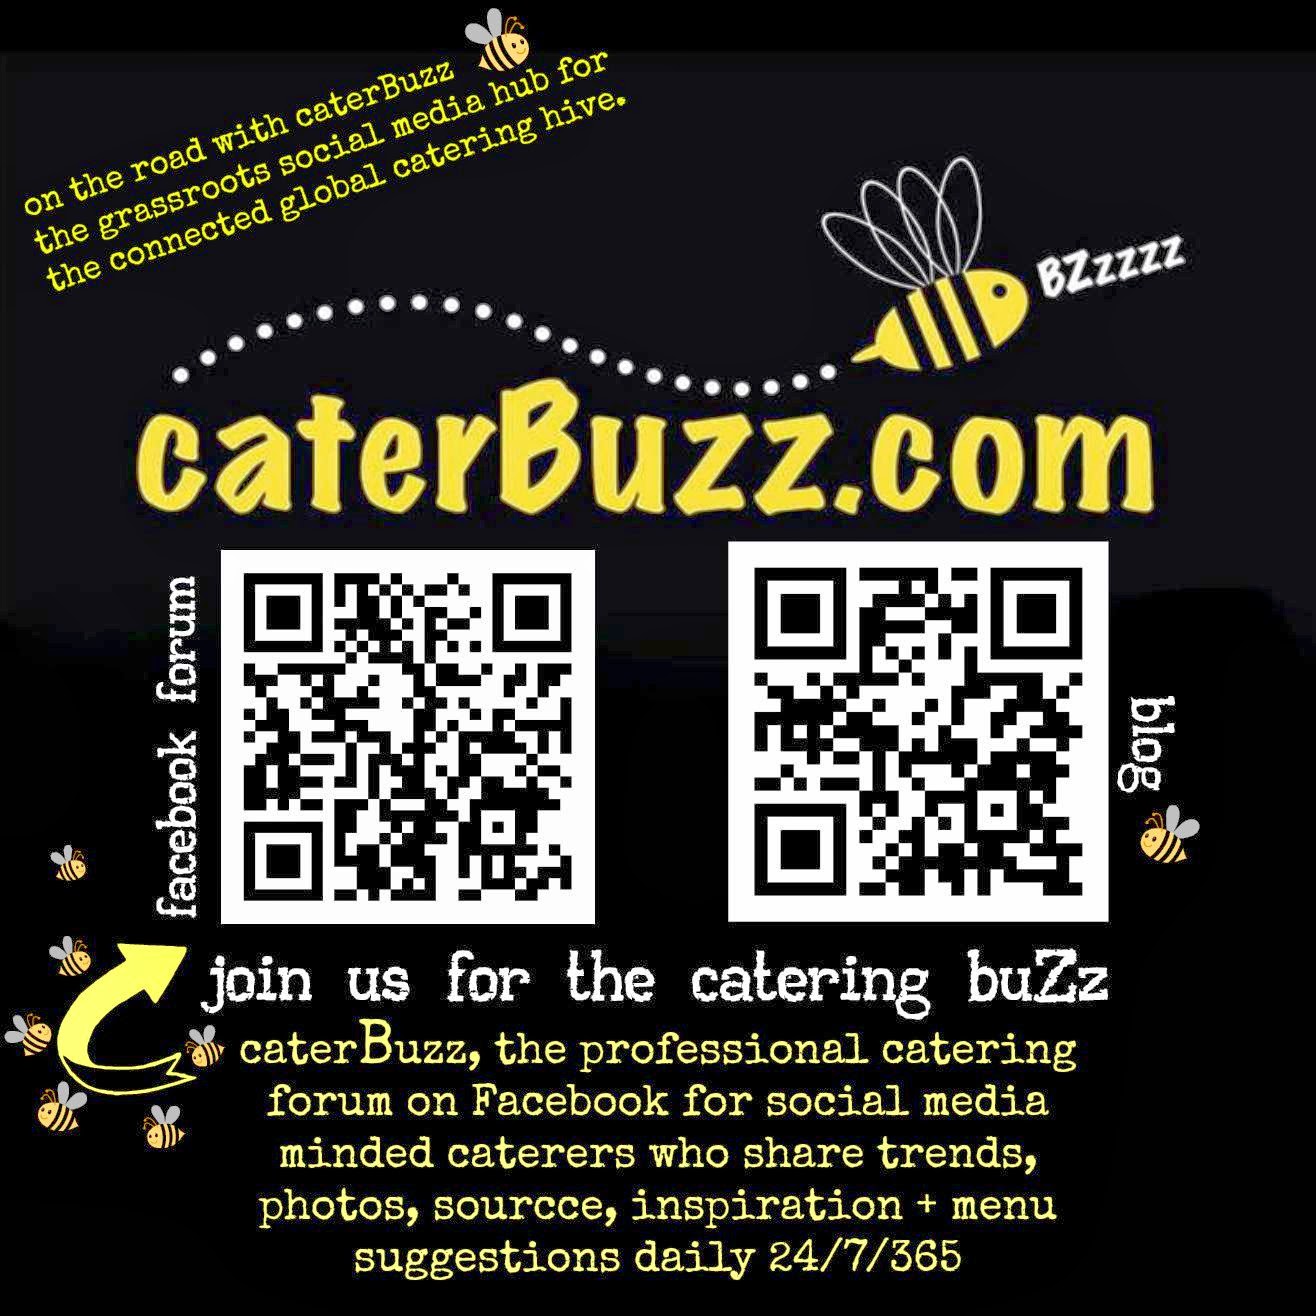 on the road with caterBuzz  - the grassroots social media hub for catering professionals